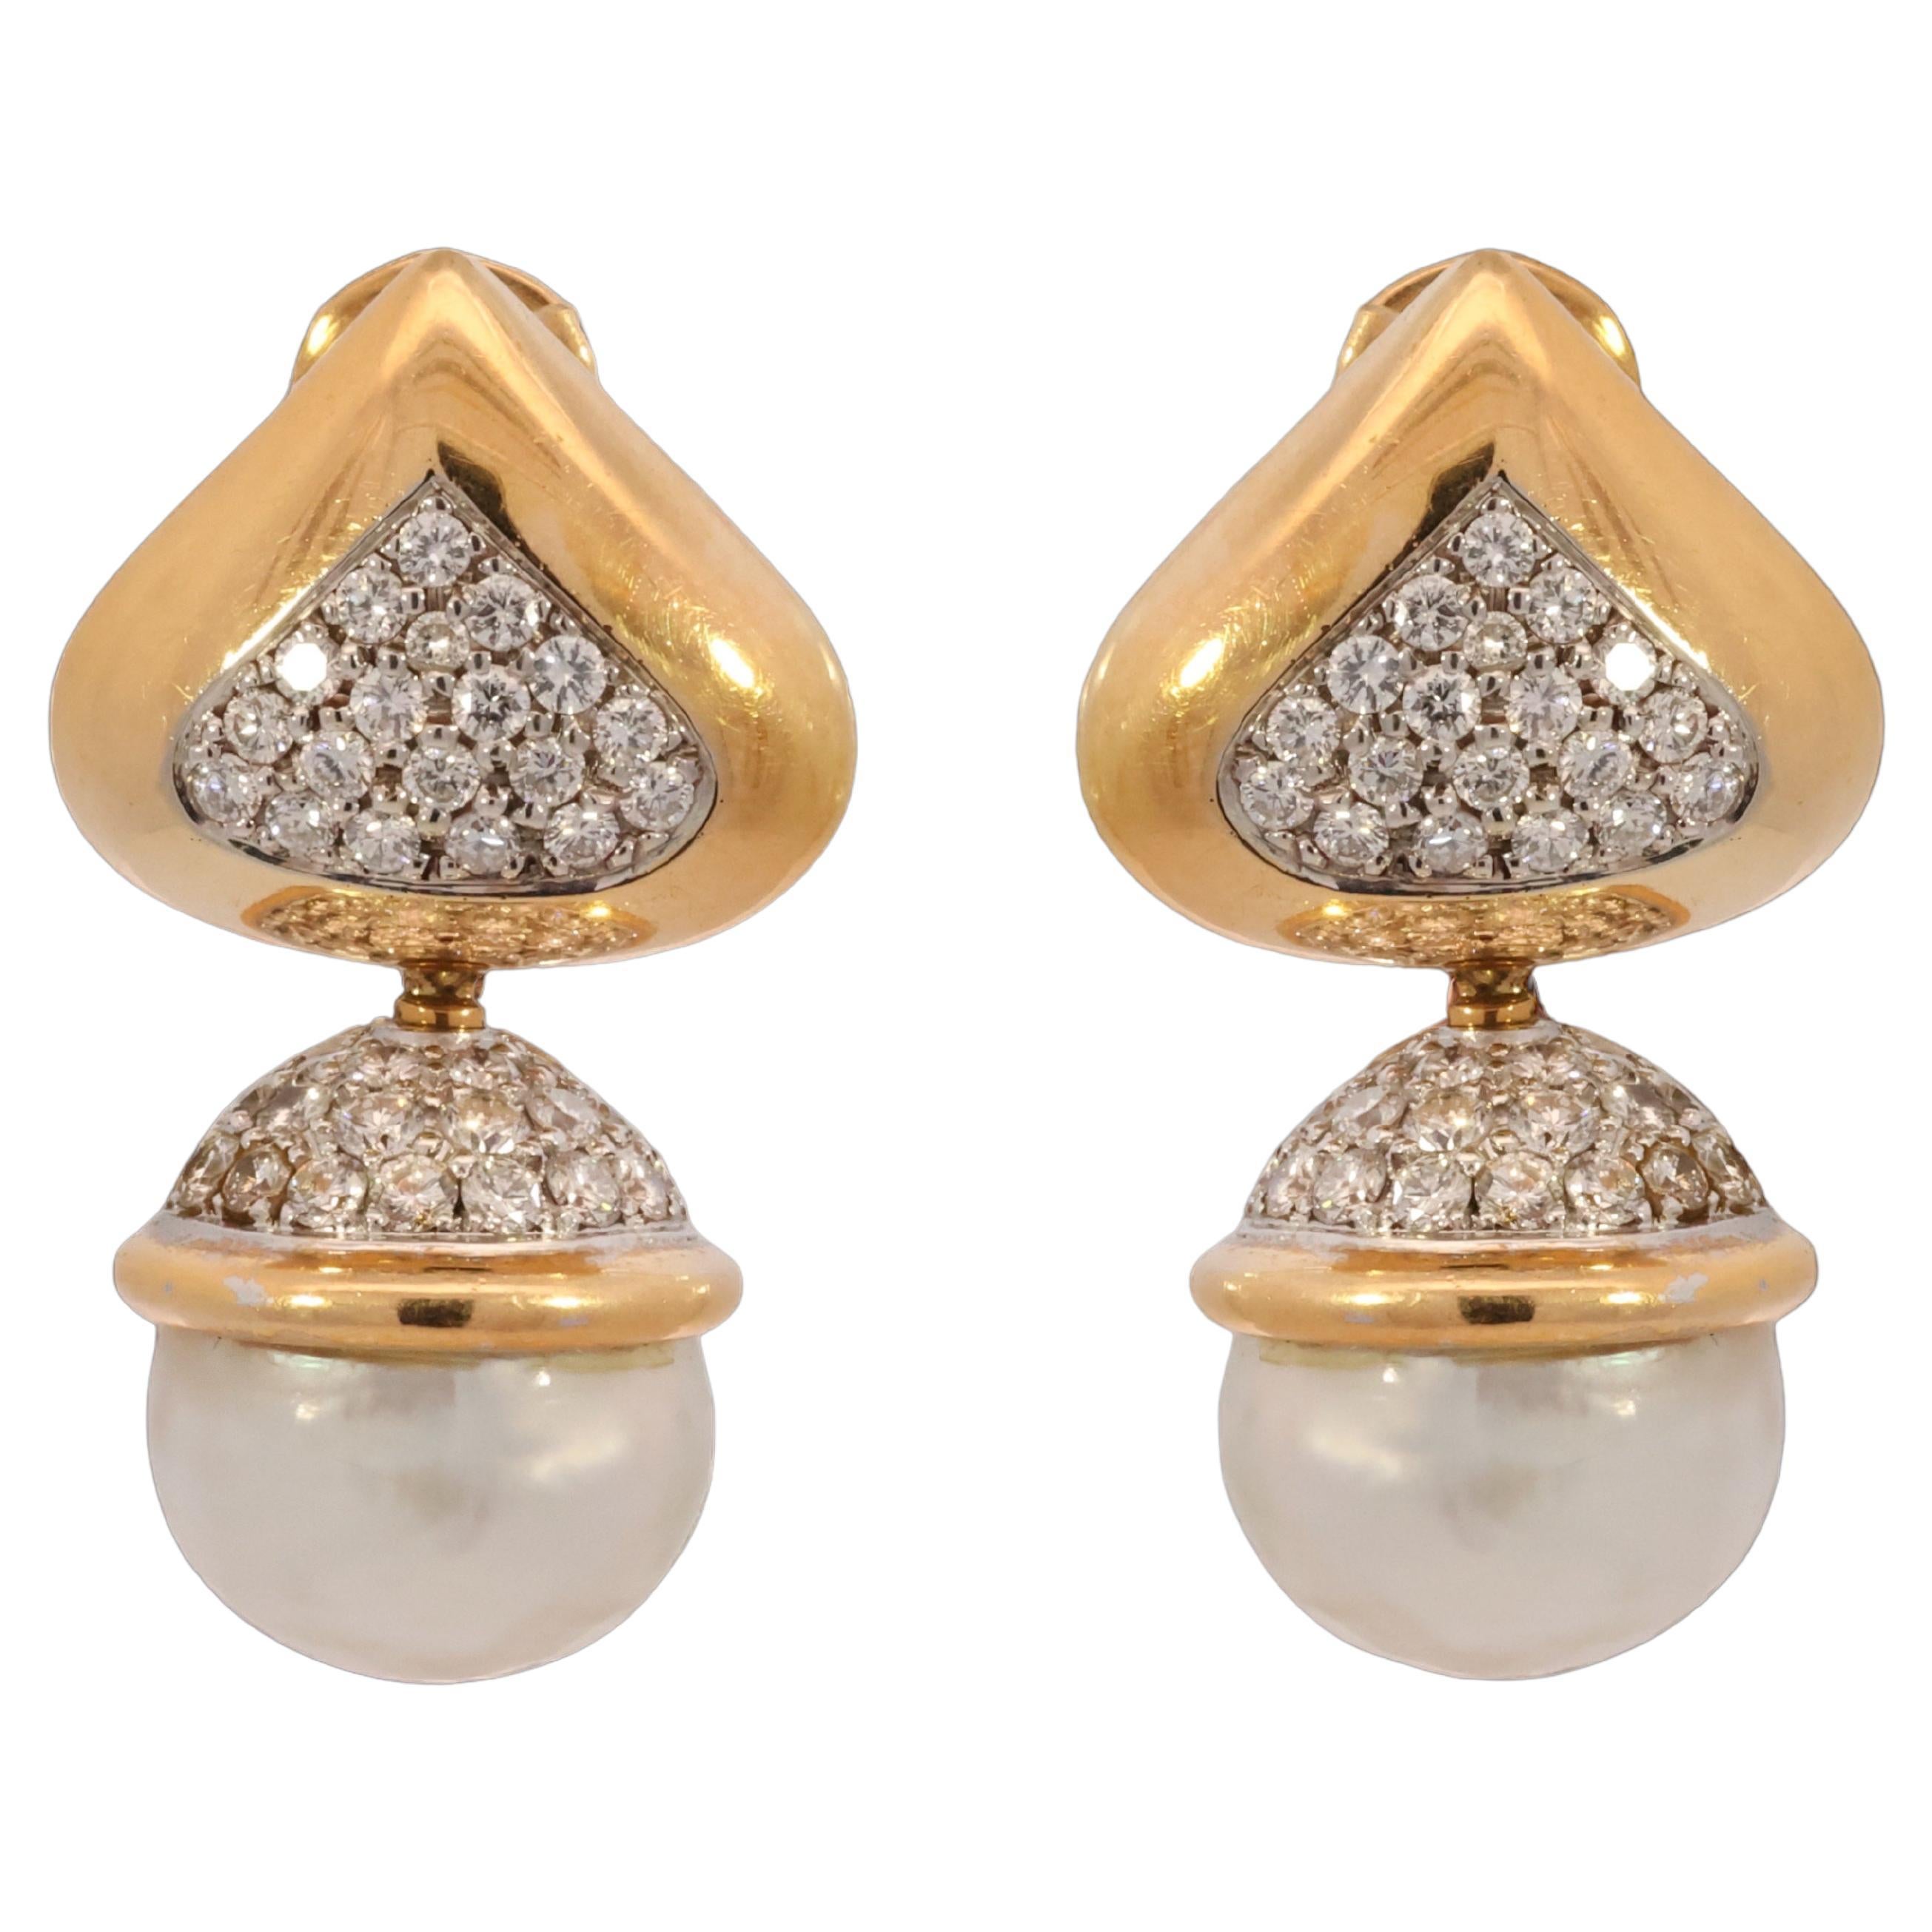 18 kt. Yellow and White Gold Earrings With Big Pearls and 2.4 ct. Diamonds 